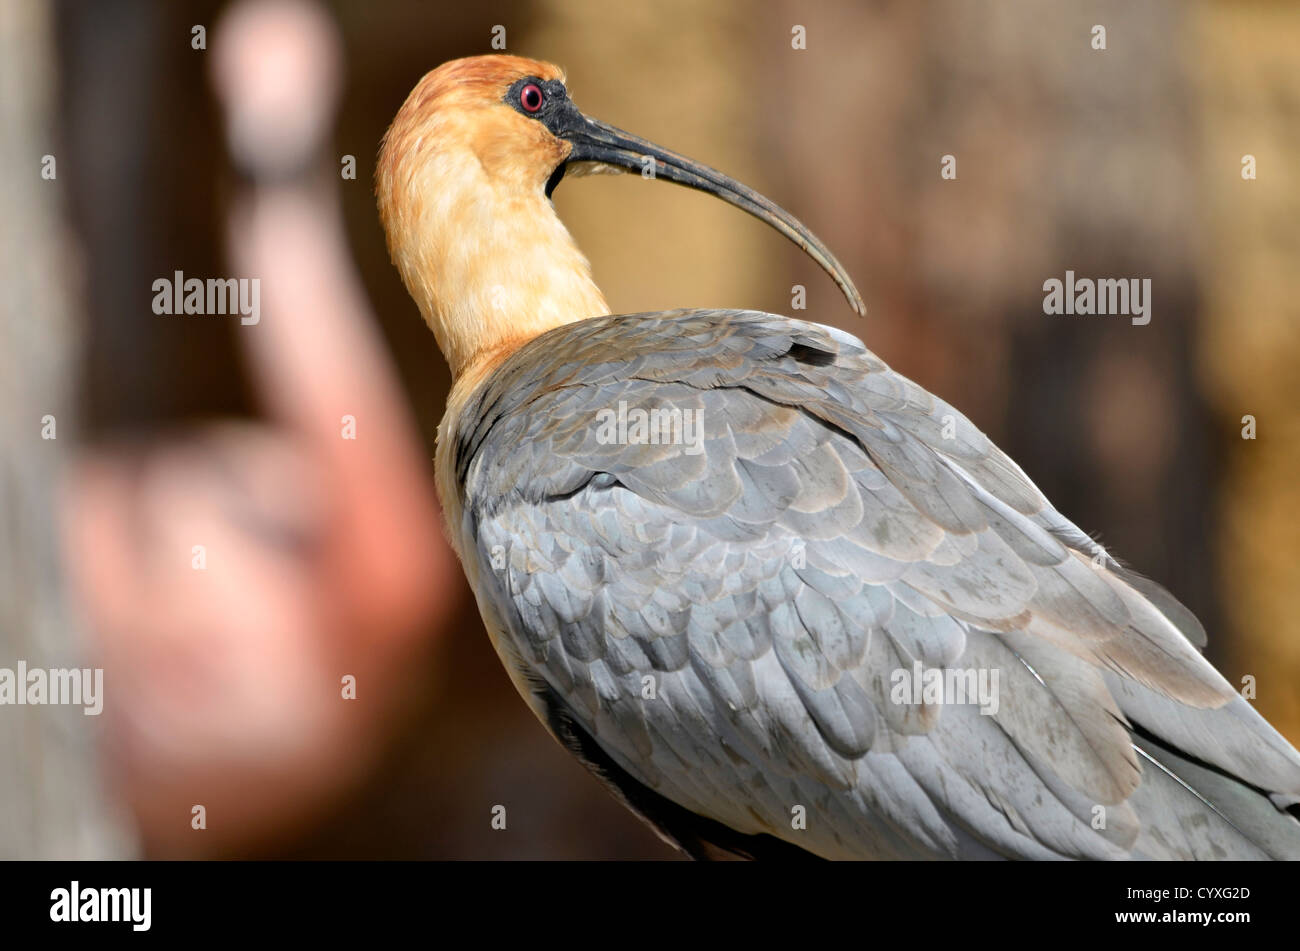 Closeup Black-faced Ibis (Theristicus melanopis) seen from behind Stock Photo